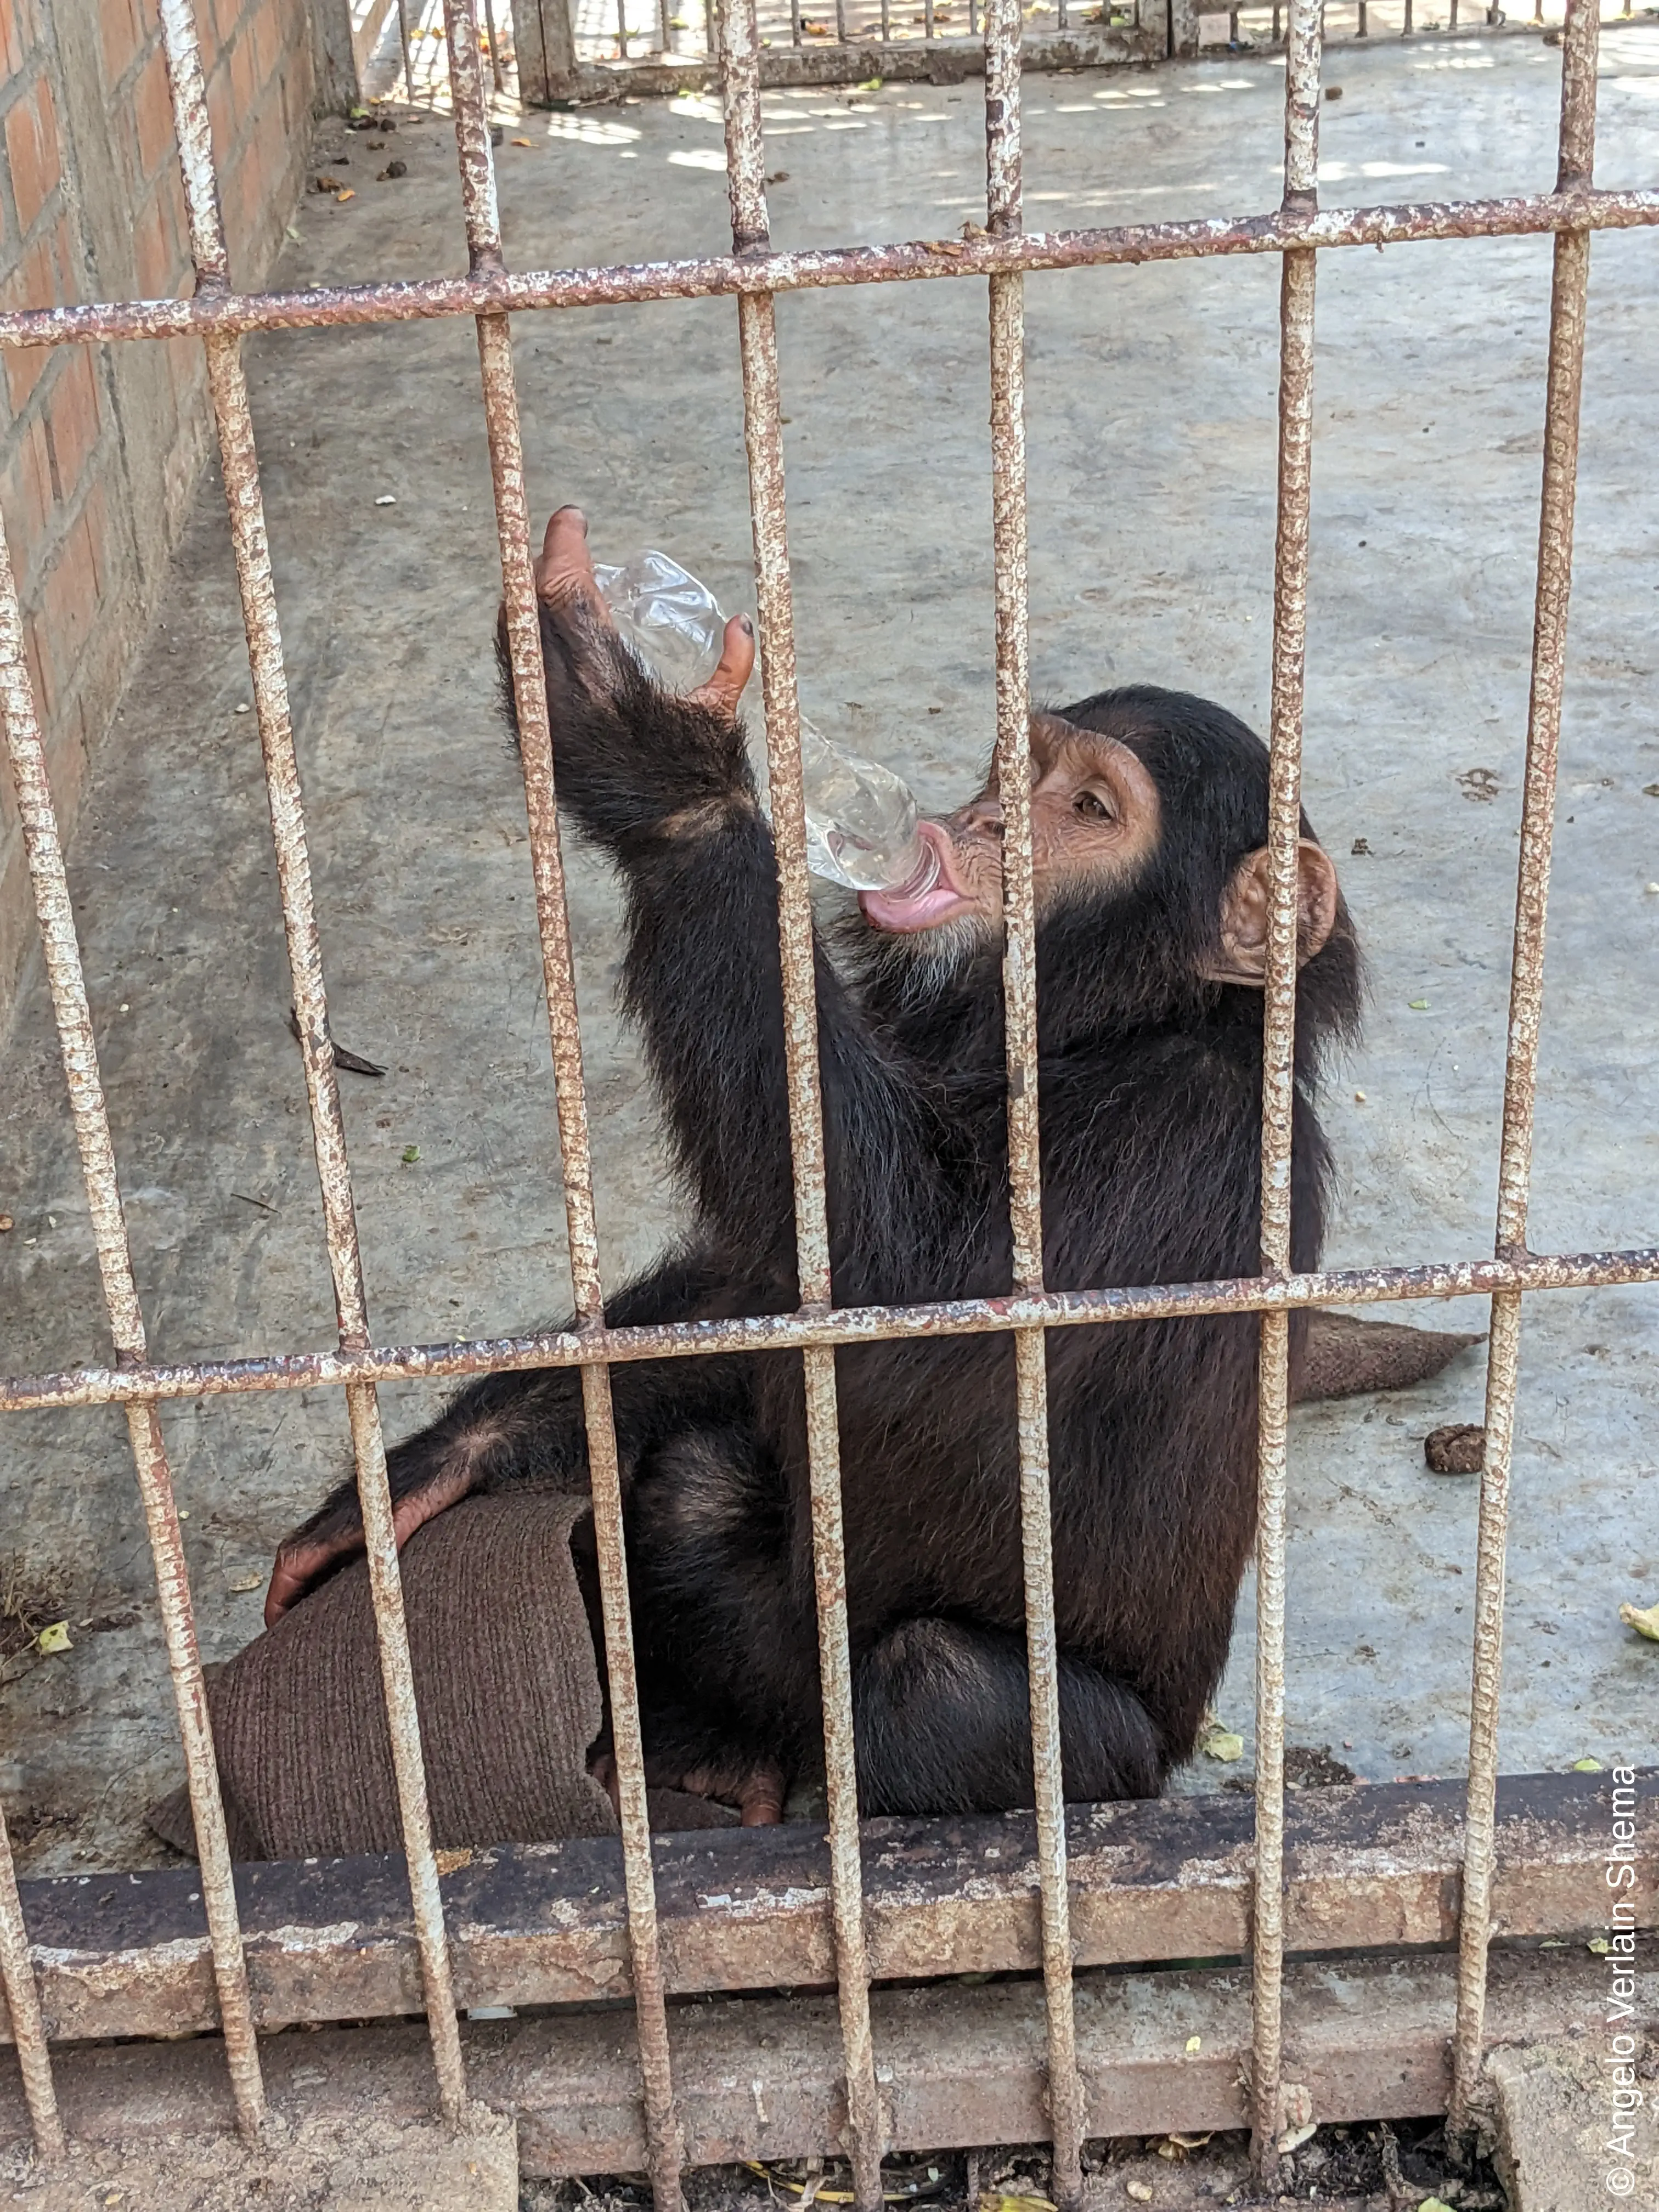 5 chimpanzees, of which 2 were babies